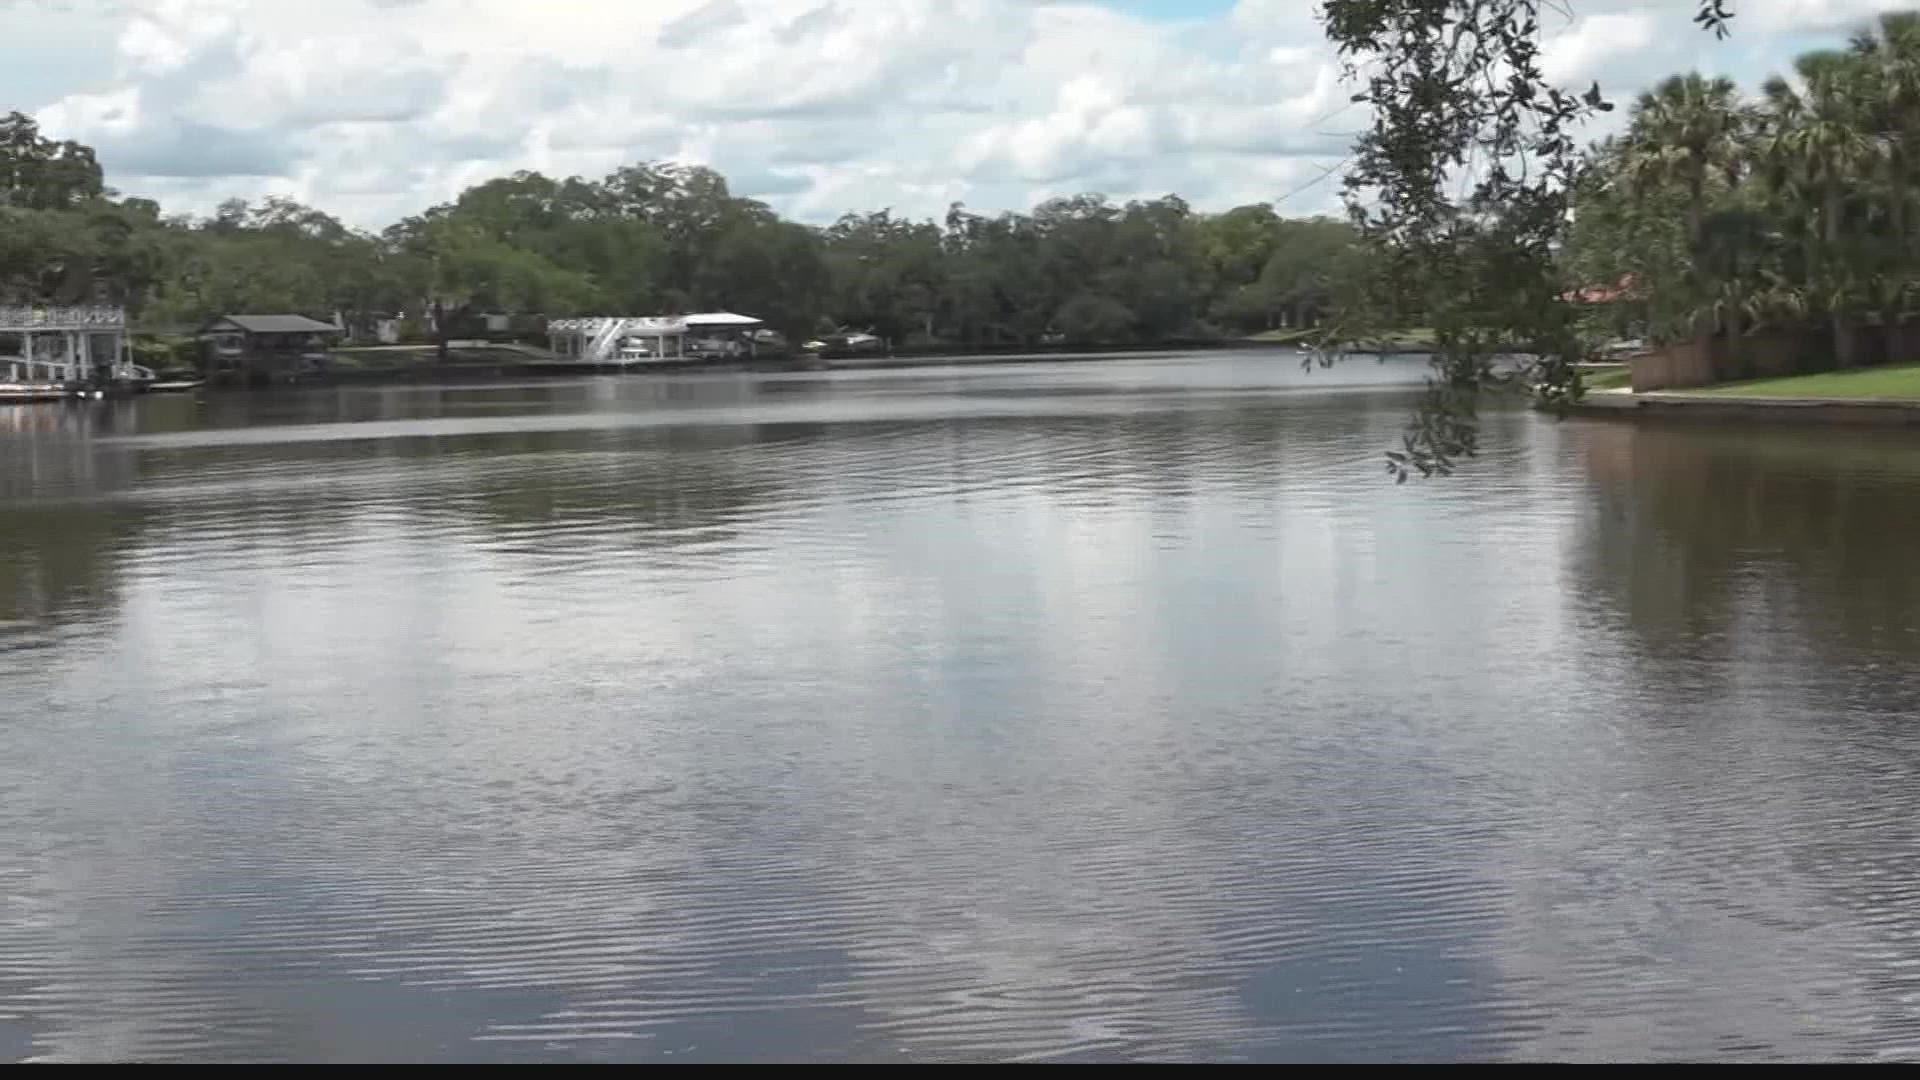 A body was found in a lake in San Marco. The 911 calls have been released.